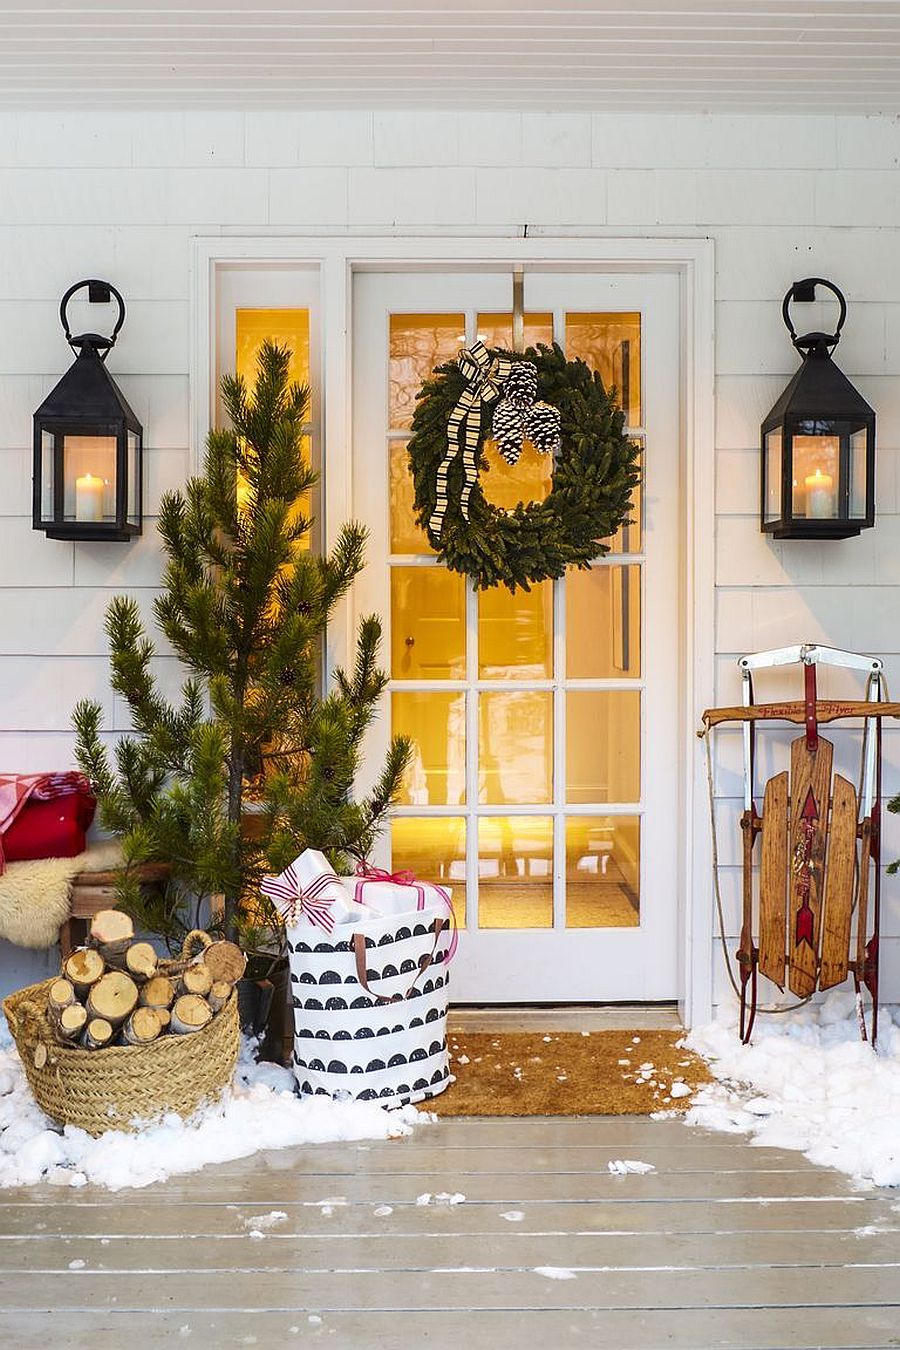 Green garland and Christmas tree for the entry transform the ambiance of this home